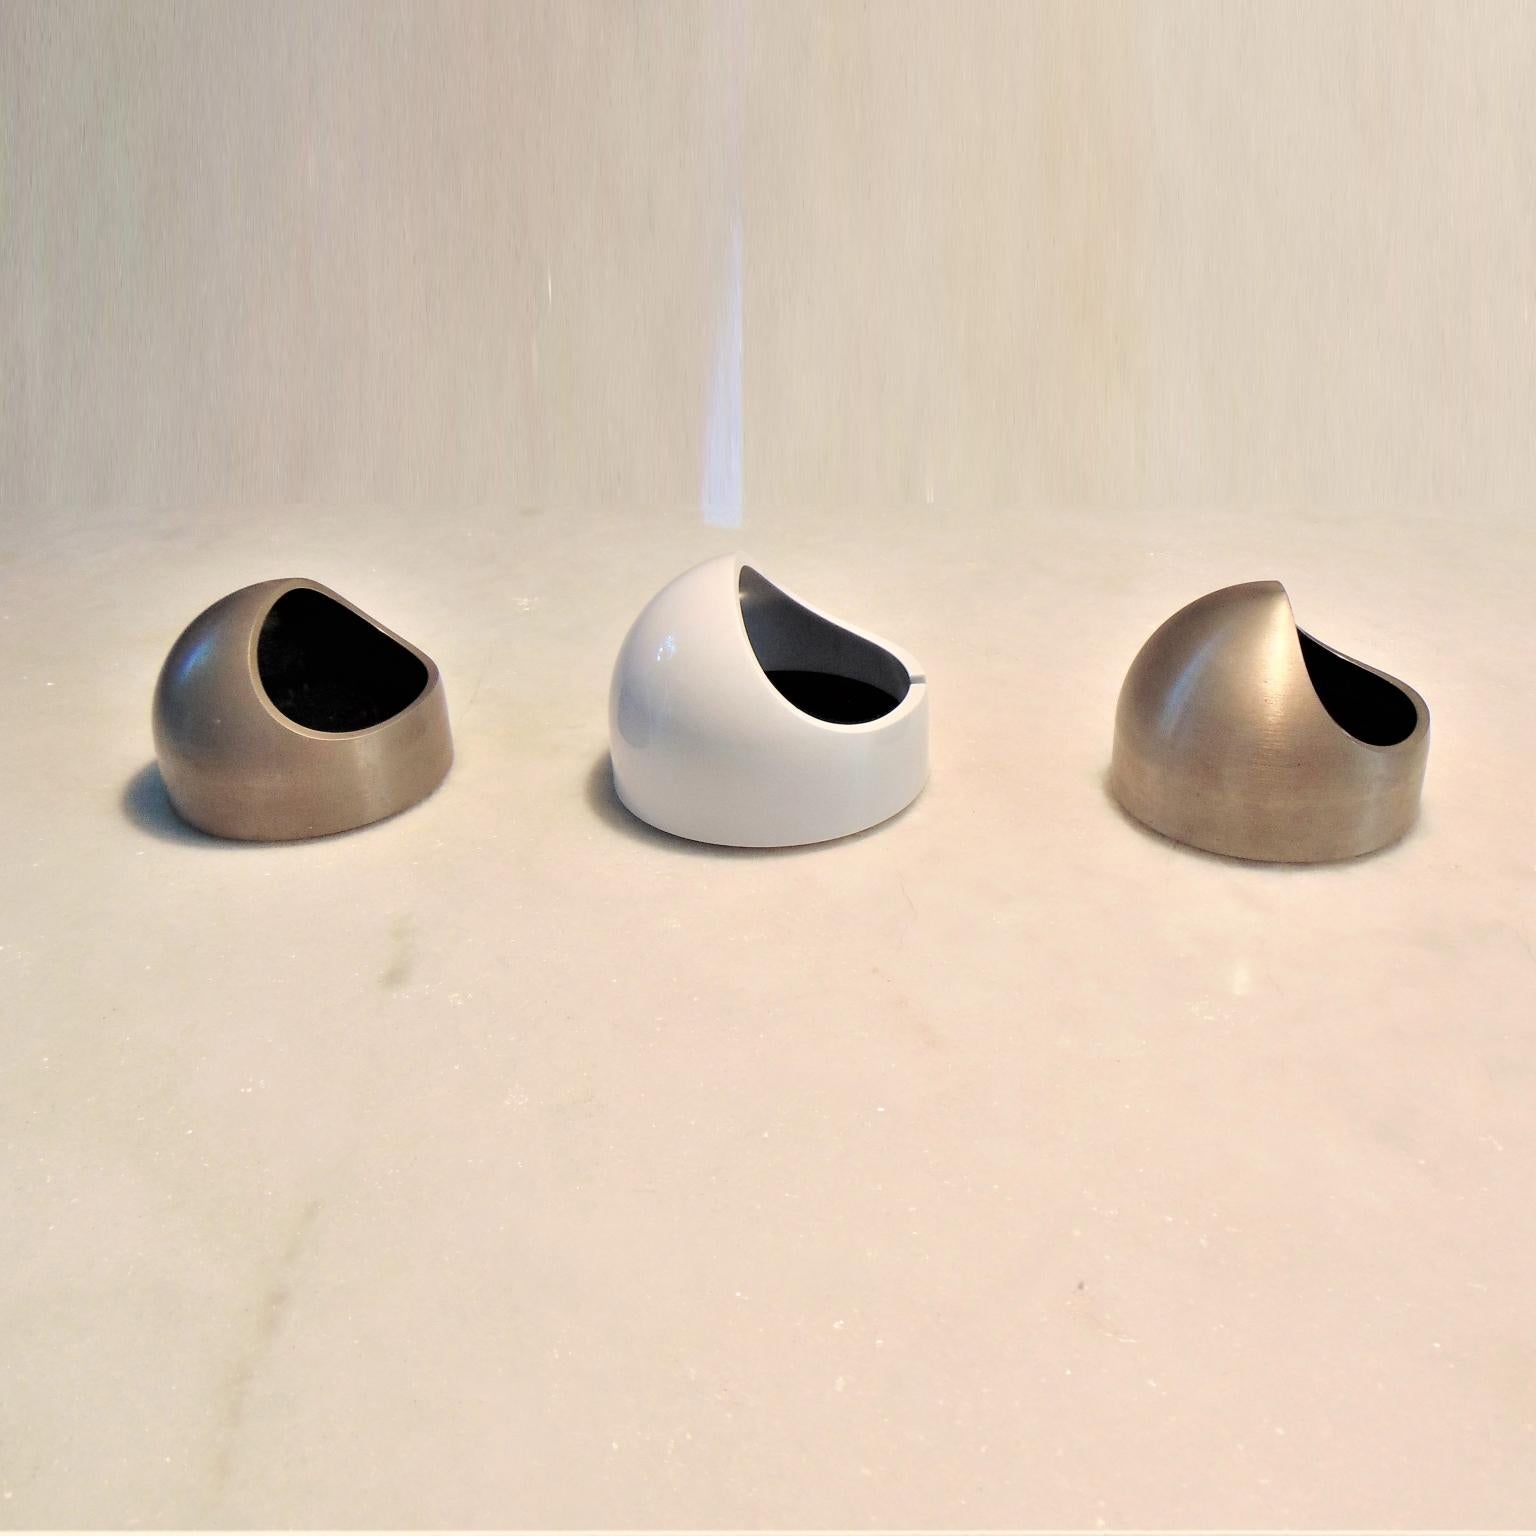 Marco Melocchi and Franco Bettonica designed the Nautico ashtray paperweight vide-poche deskset in 1975. This design is still part of the MOMA collection. Two of these objects are in brushed steel, with a black acrylic floor and bottom. The white